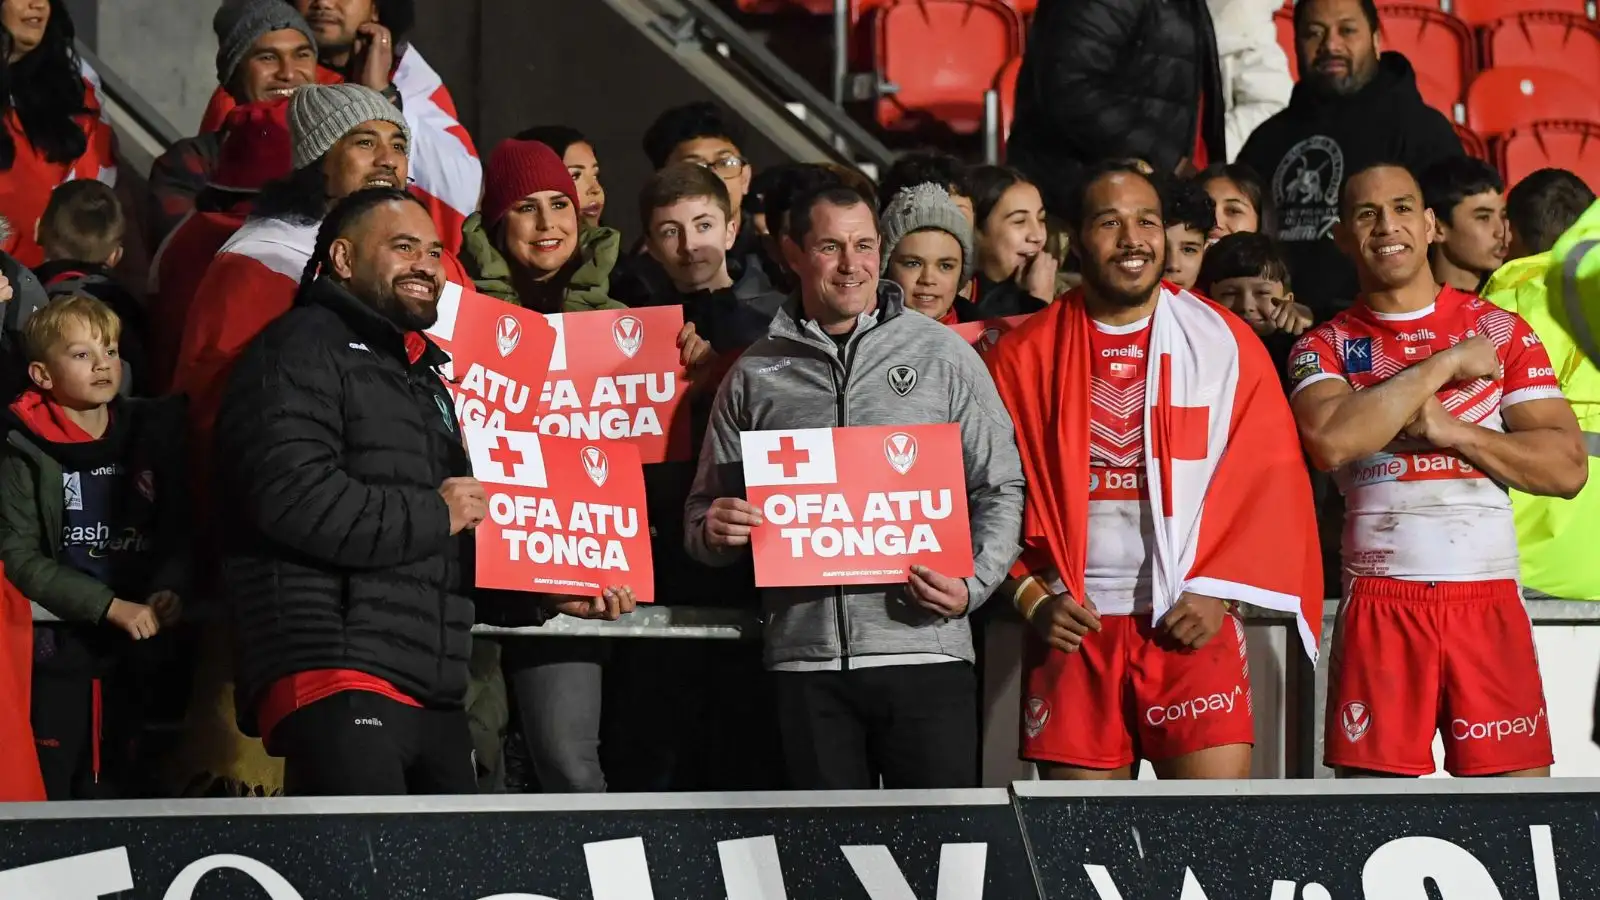 Konrad Hurrell, Kristian Woolf, Agnatius Paasi & Will Hopoate join the St Helens crowd in displaying messages of support for Tonga